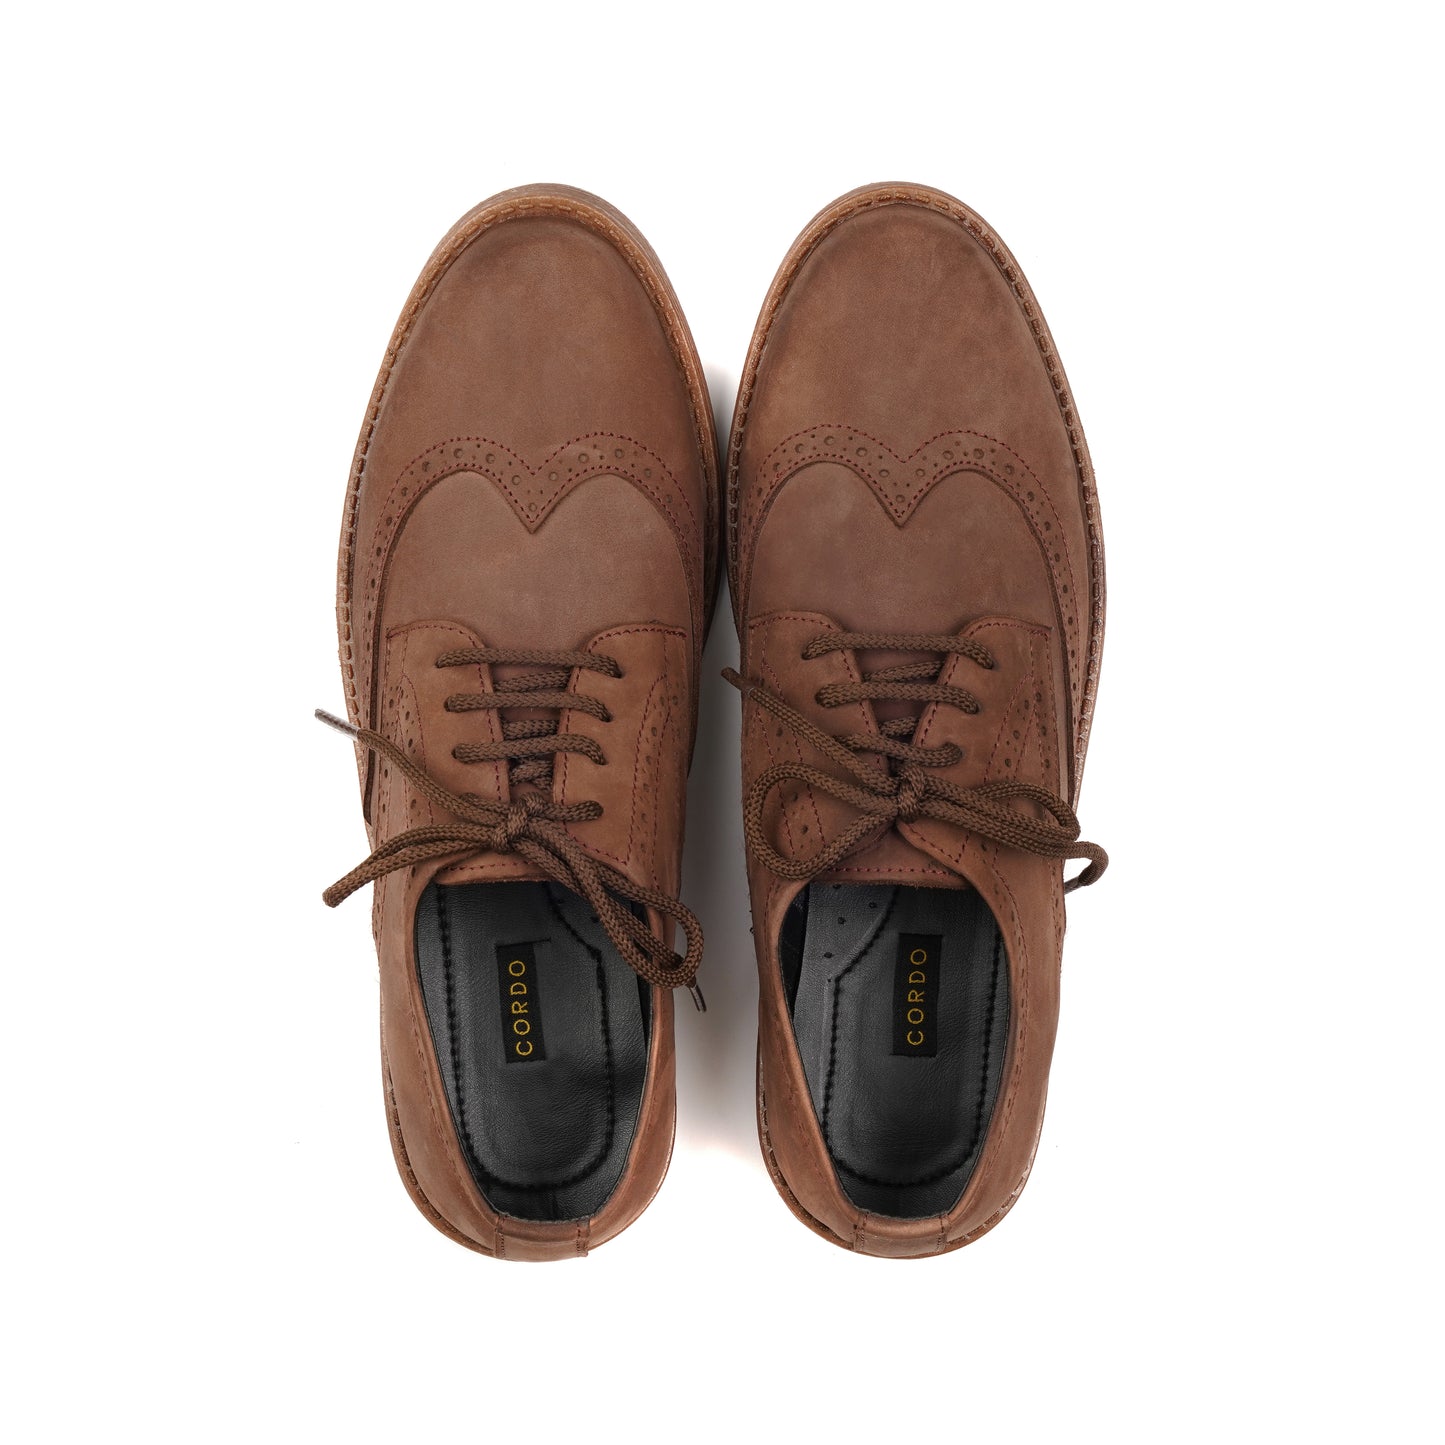 CS008- Oily Brown Brogue Shoes Casual Style